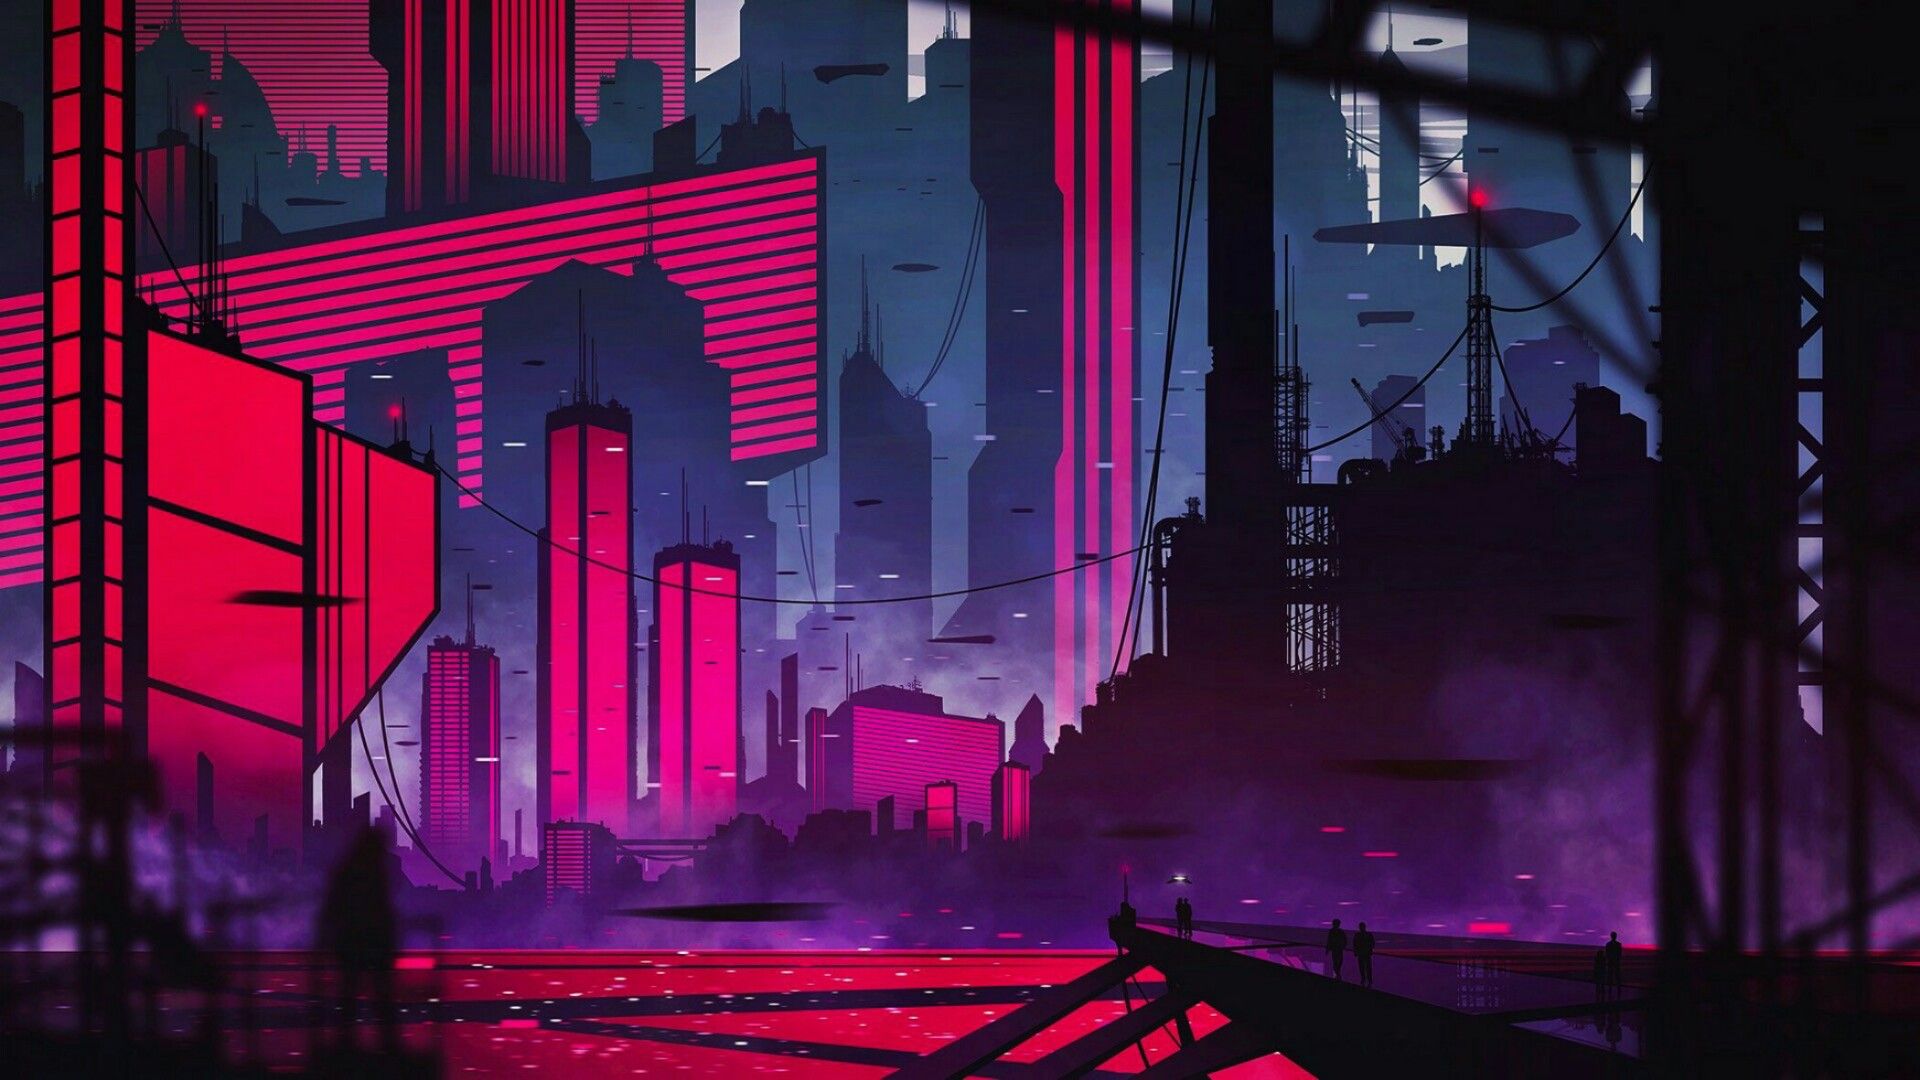 Neon City Wallpaper - Neon City Wallpaper Hd , HD Wallpaper & Backgrounds